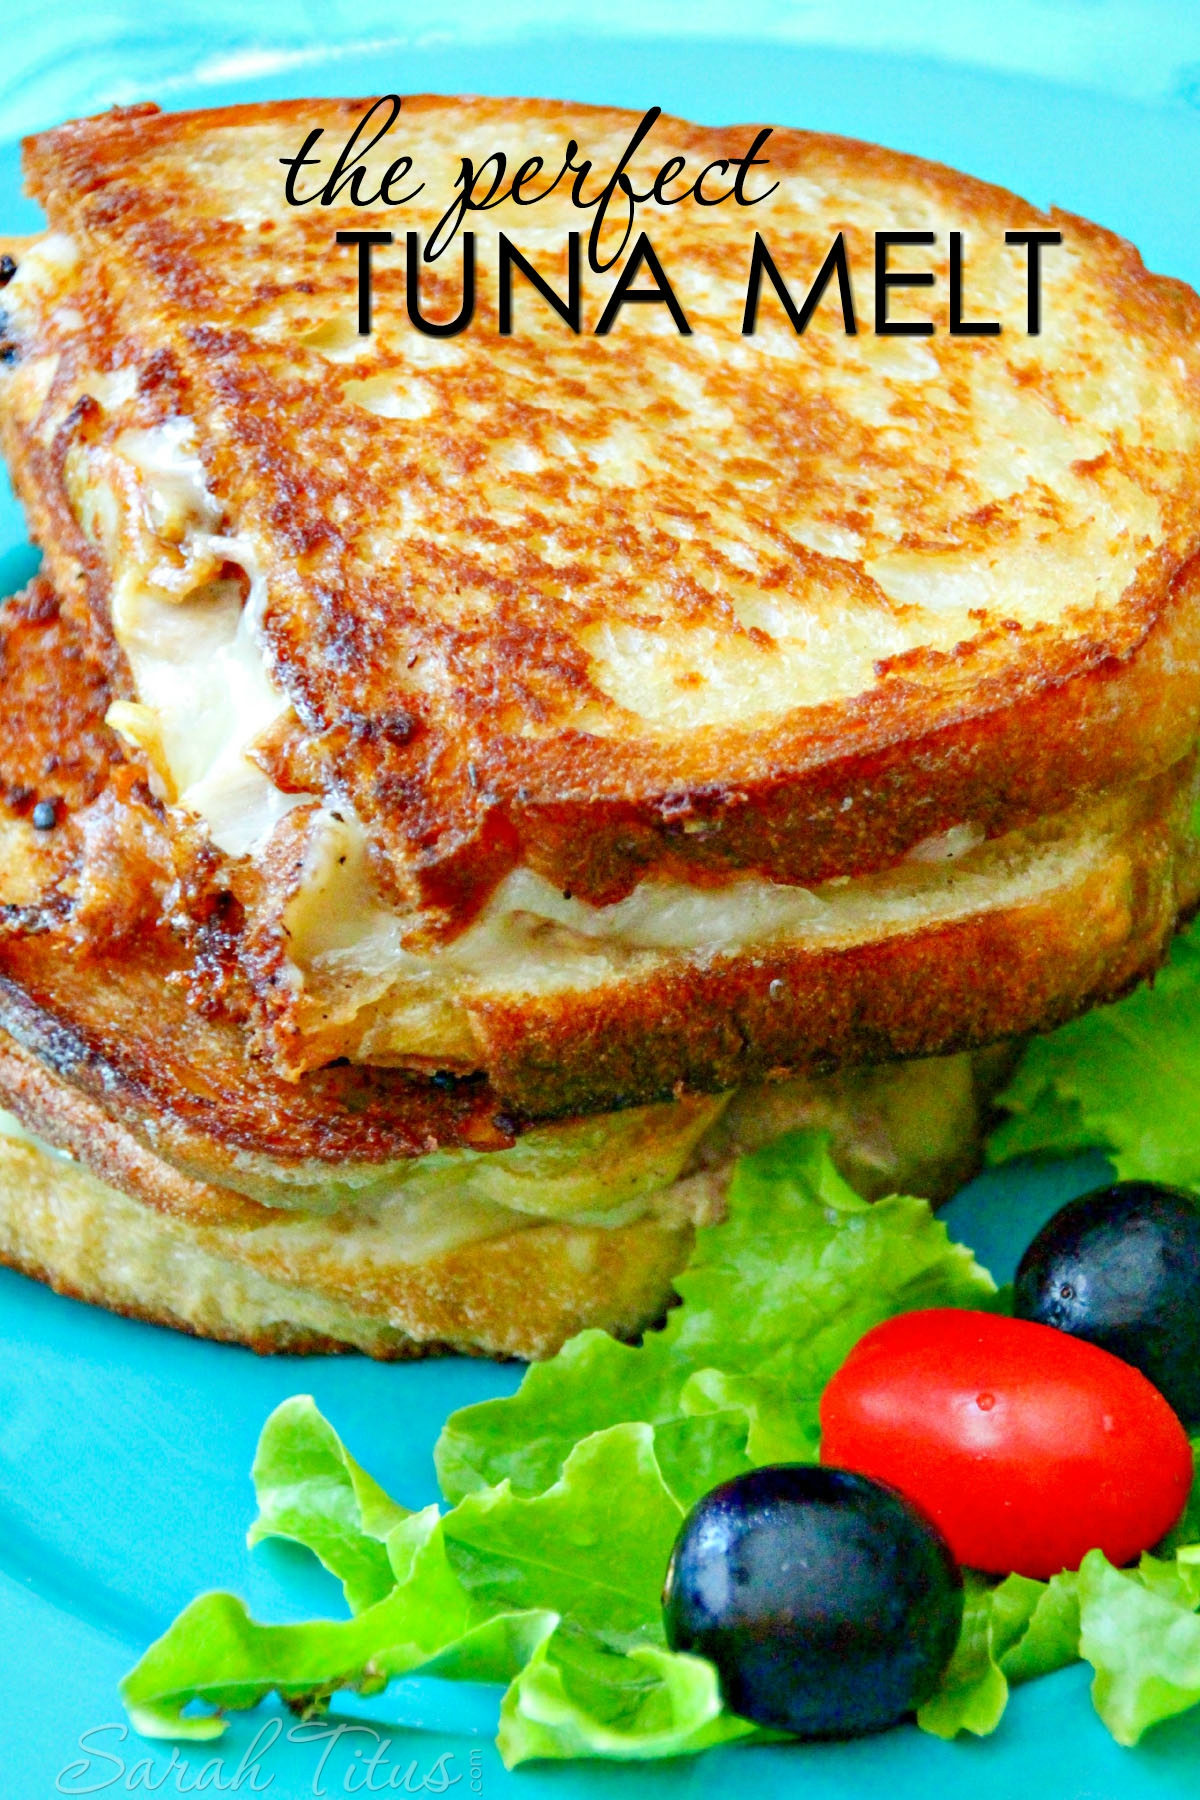 The perfect Tuna Melt is ooey-gooey and packed full of delicious flavor, and perfect for the nights when you just want to put something on the table super quick or for that lunch date with your friends.